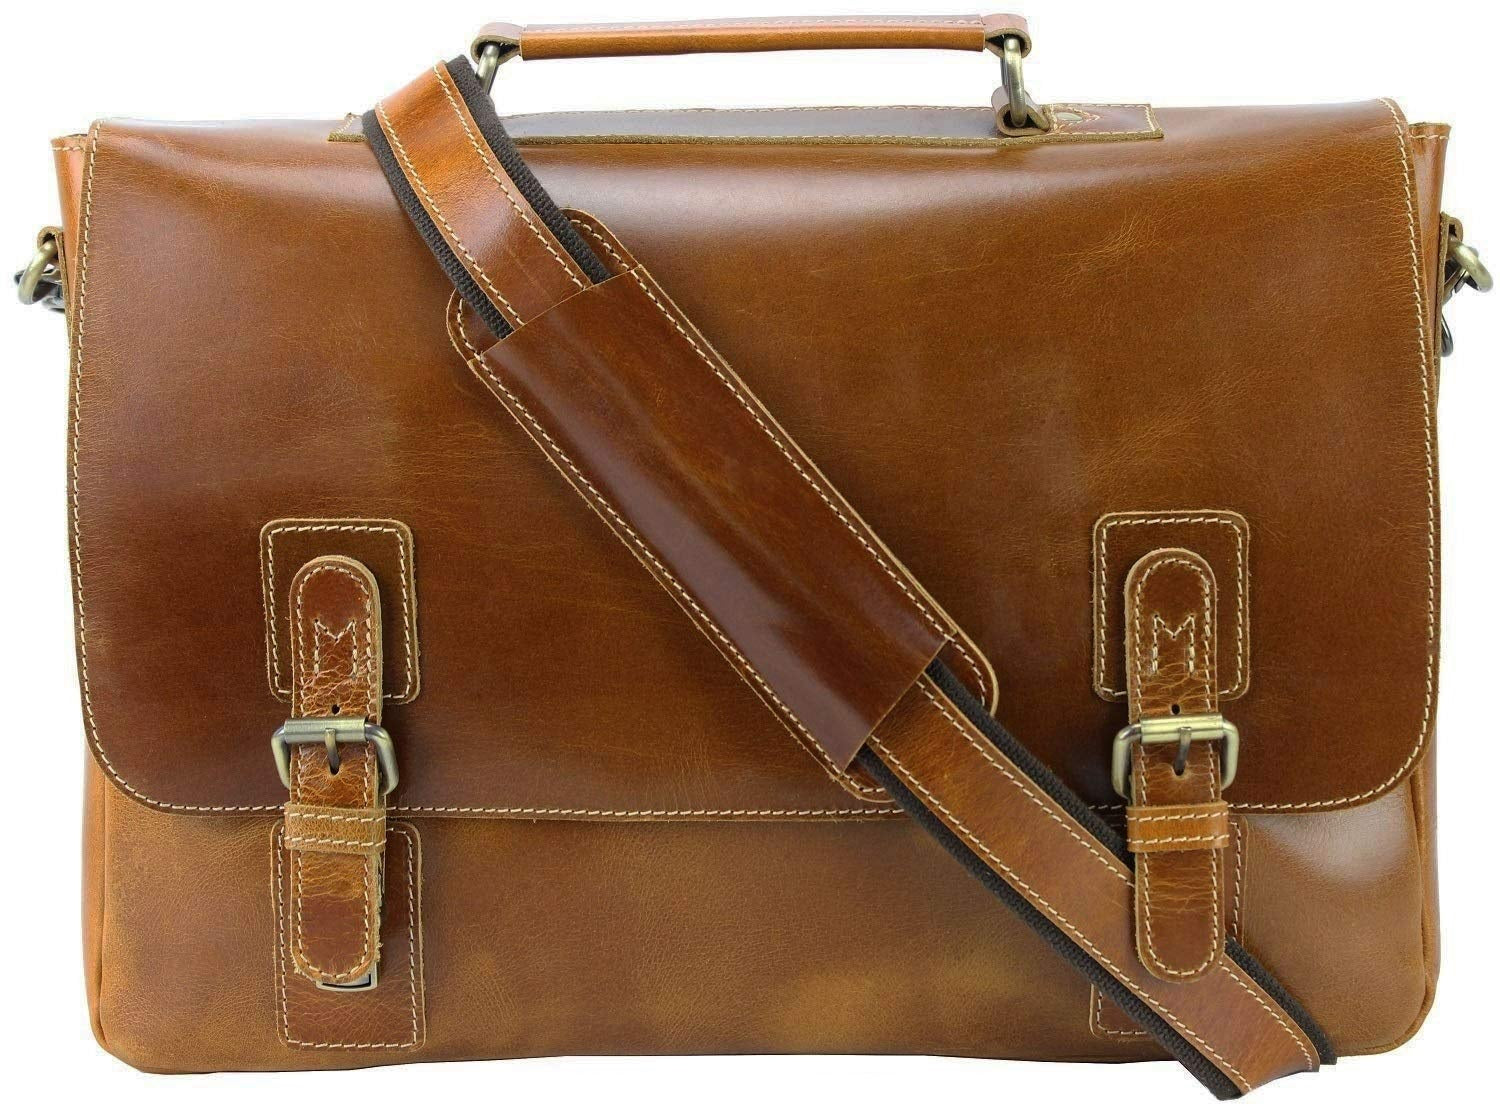 Leather messenger bag for men with laptop compartment – Niche Lane